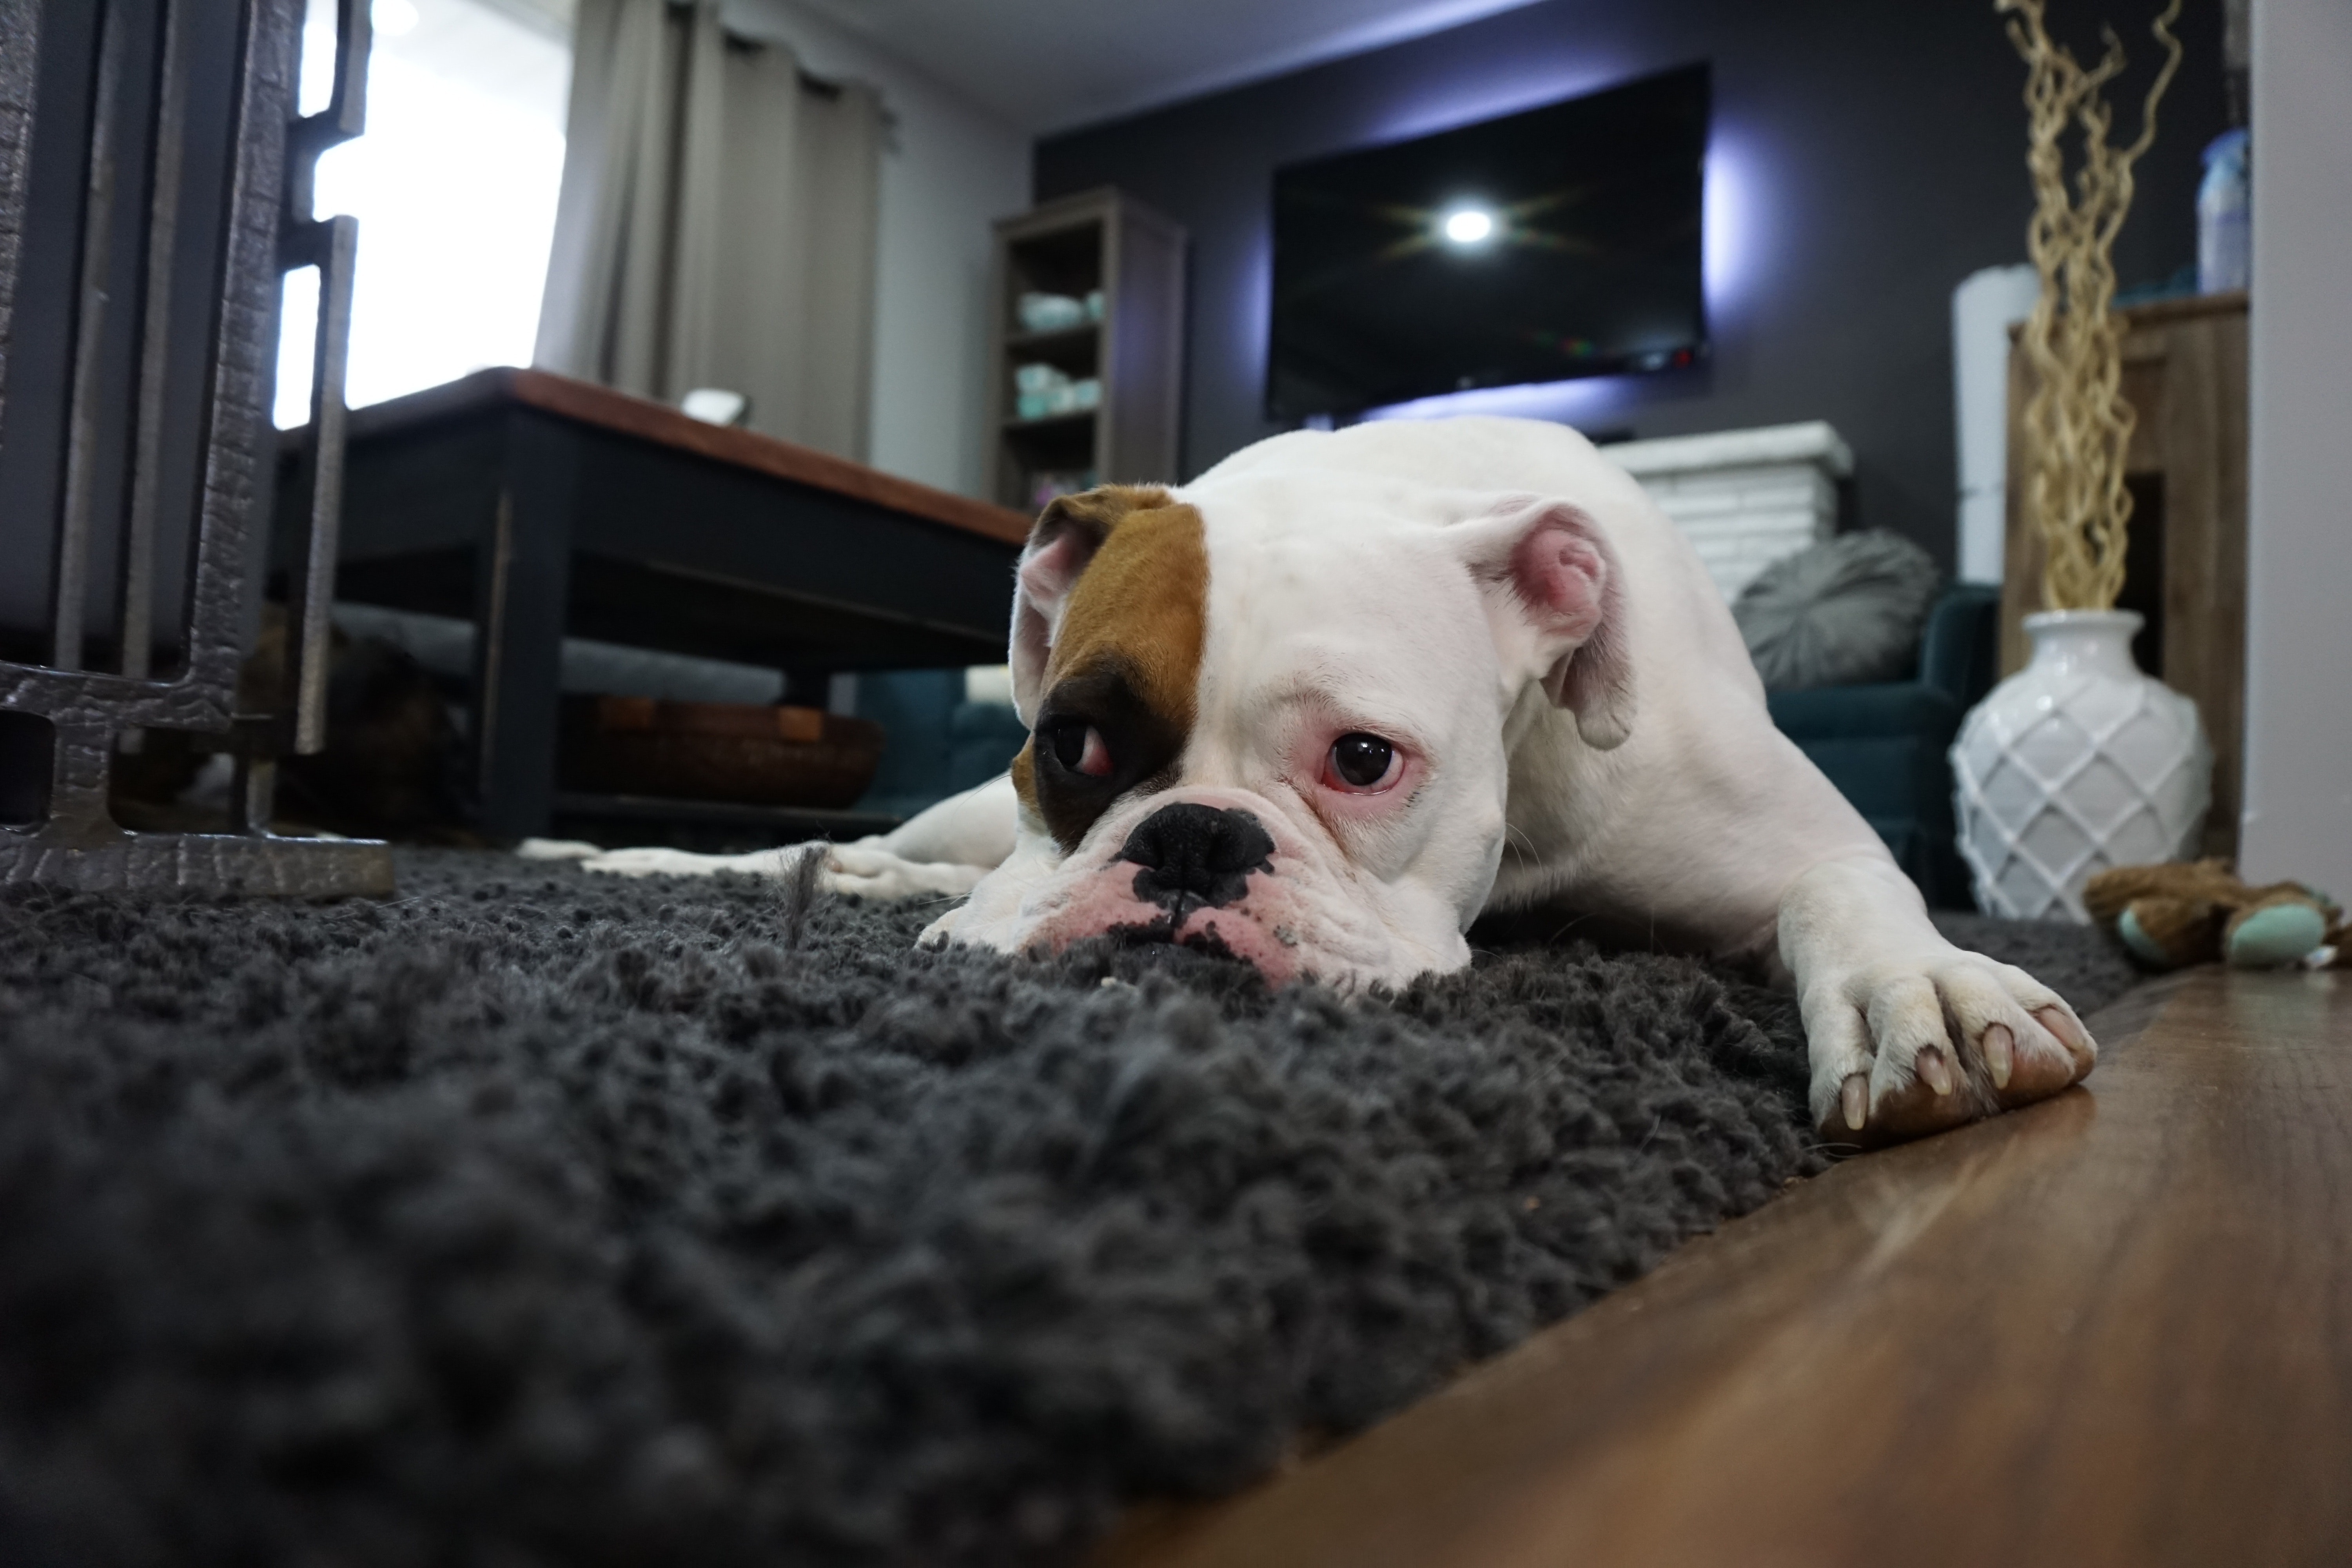 We love our pets, but we hate their messes. Chem-Dry of Stromsburg offer a special cleaning treat called Pet Urine Removal Treatment that is specifically designed to remove pet urine and pet odor from your carpet.